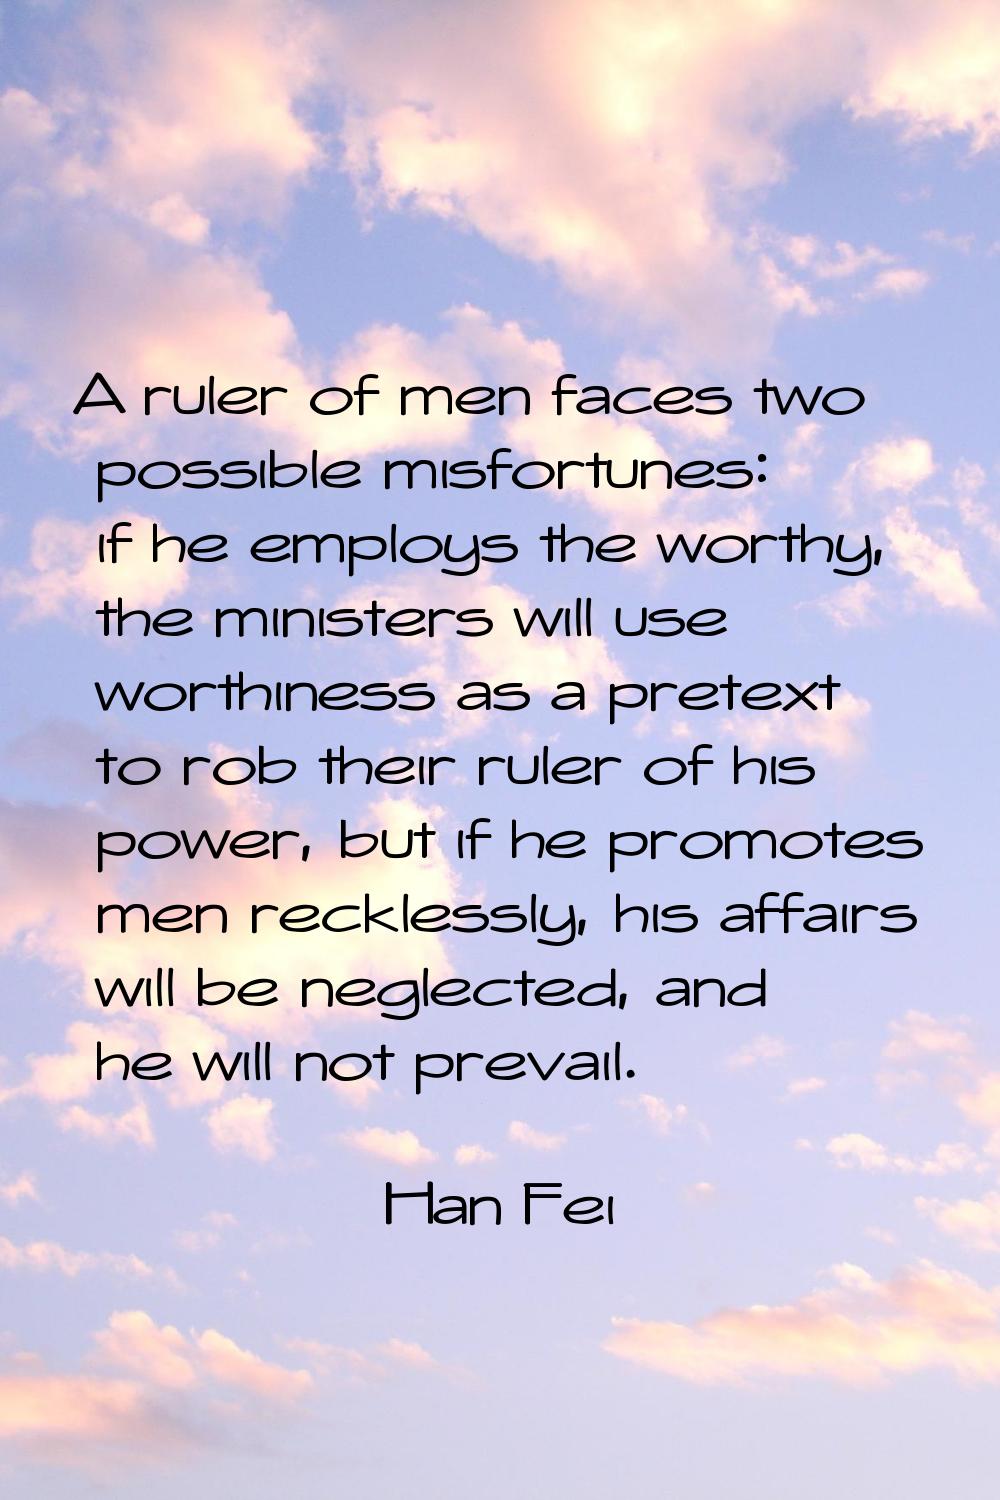 A ruler of men faces two possible misfortunes: if he employs the worthy, the ministers will use wor